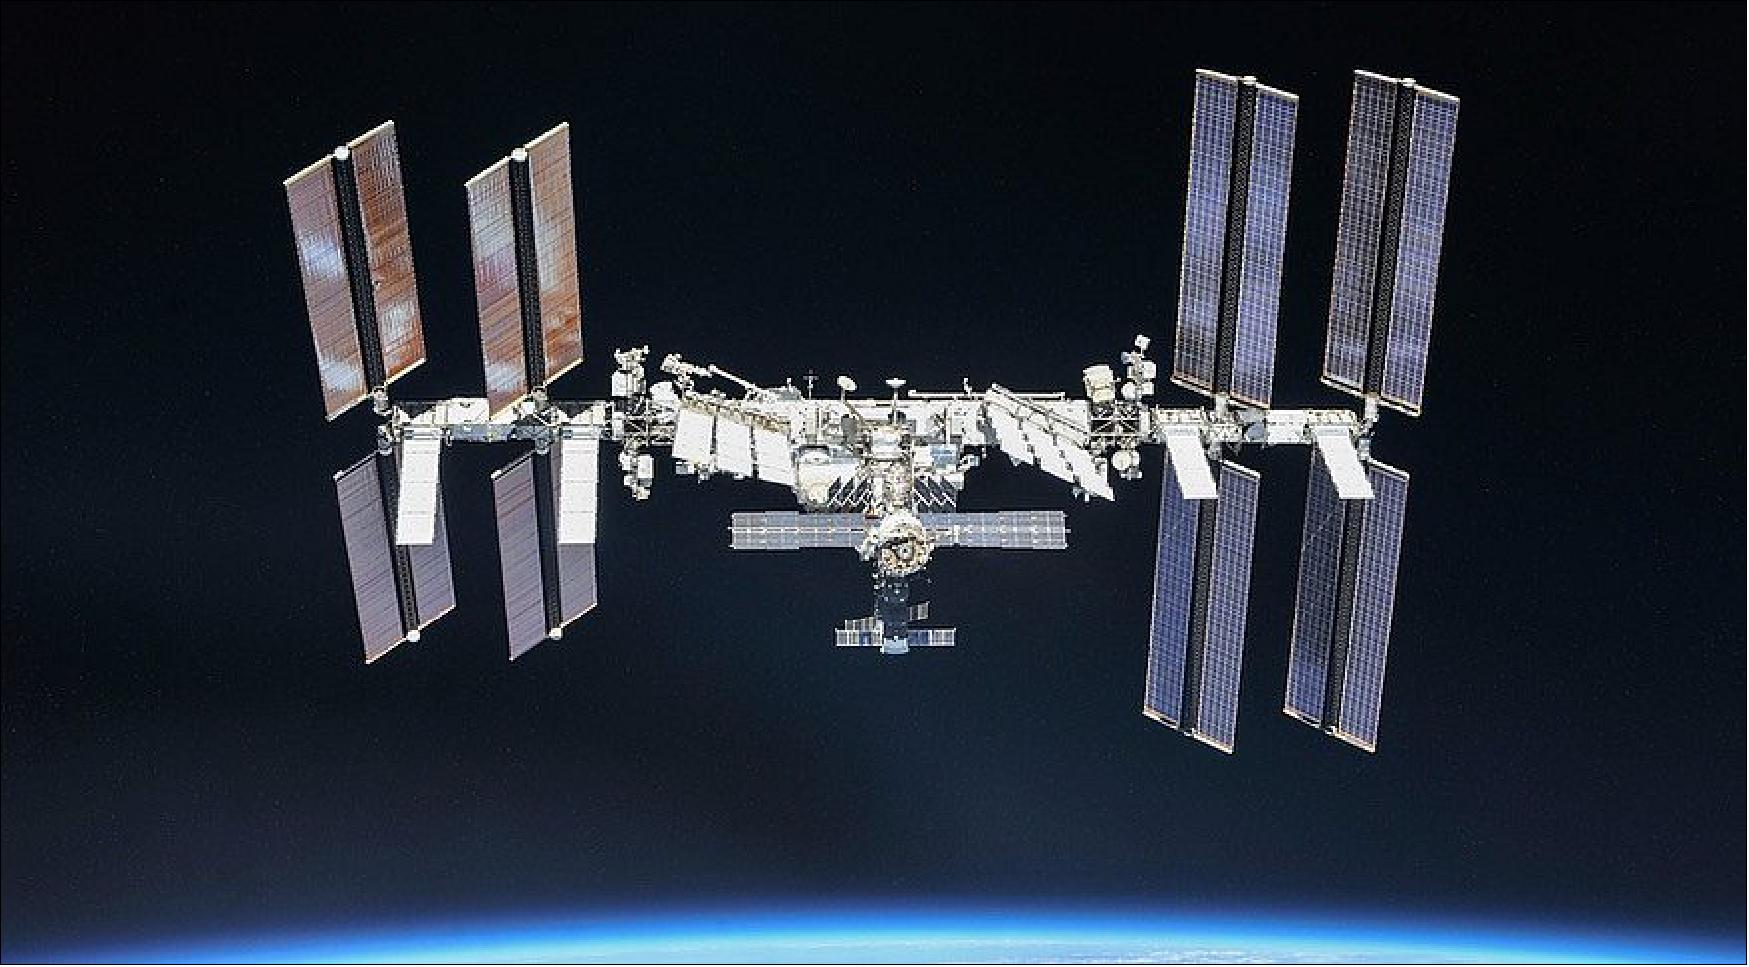 Figure 2: The change in NASA's pricing policy for commercial use of the ISS means that companies that used to pay $3,000 per kilogram to get cargo to the station now have to pay $20,000 per kilogram (image credit: NASA)